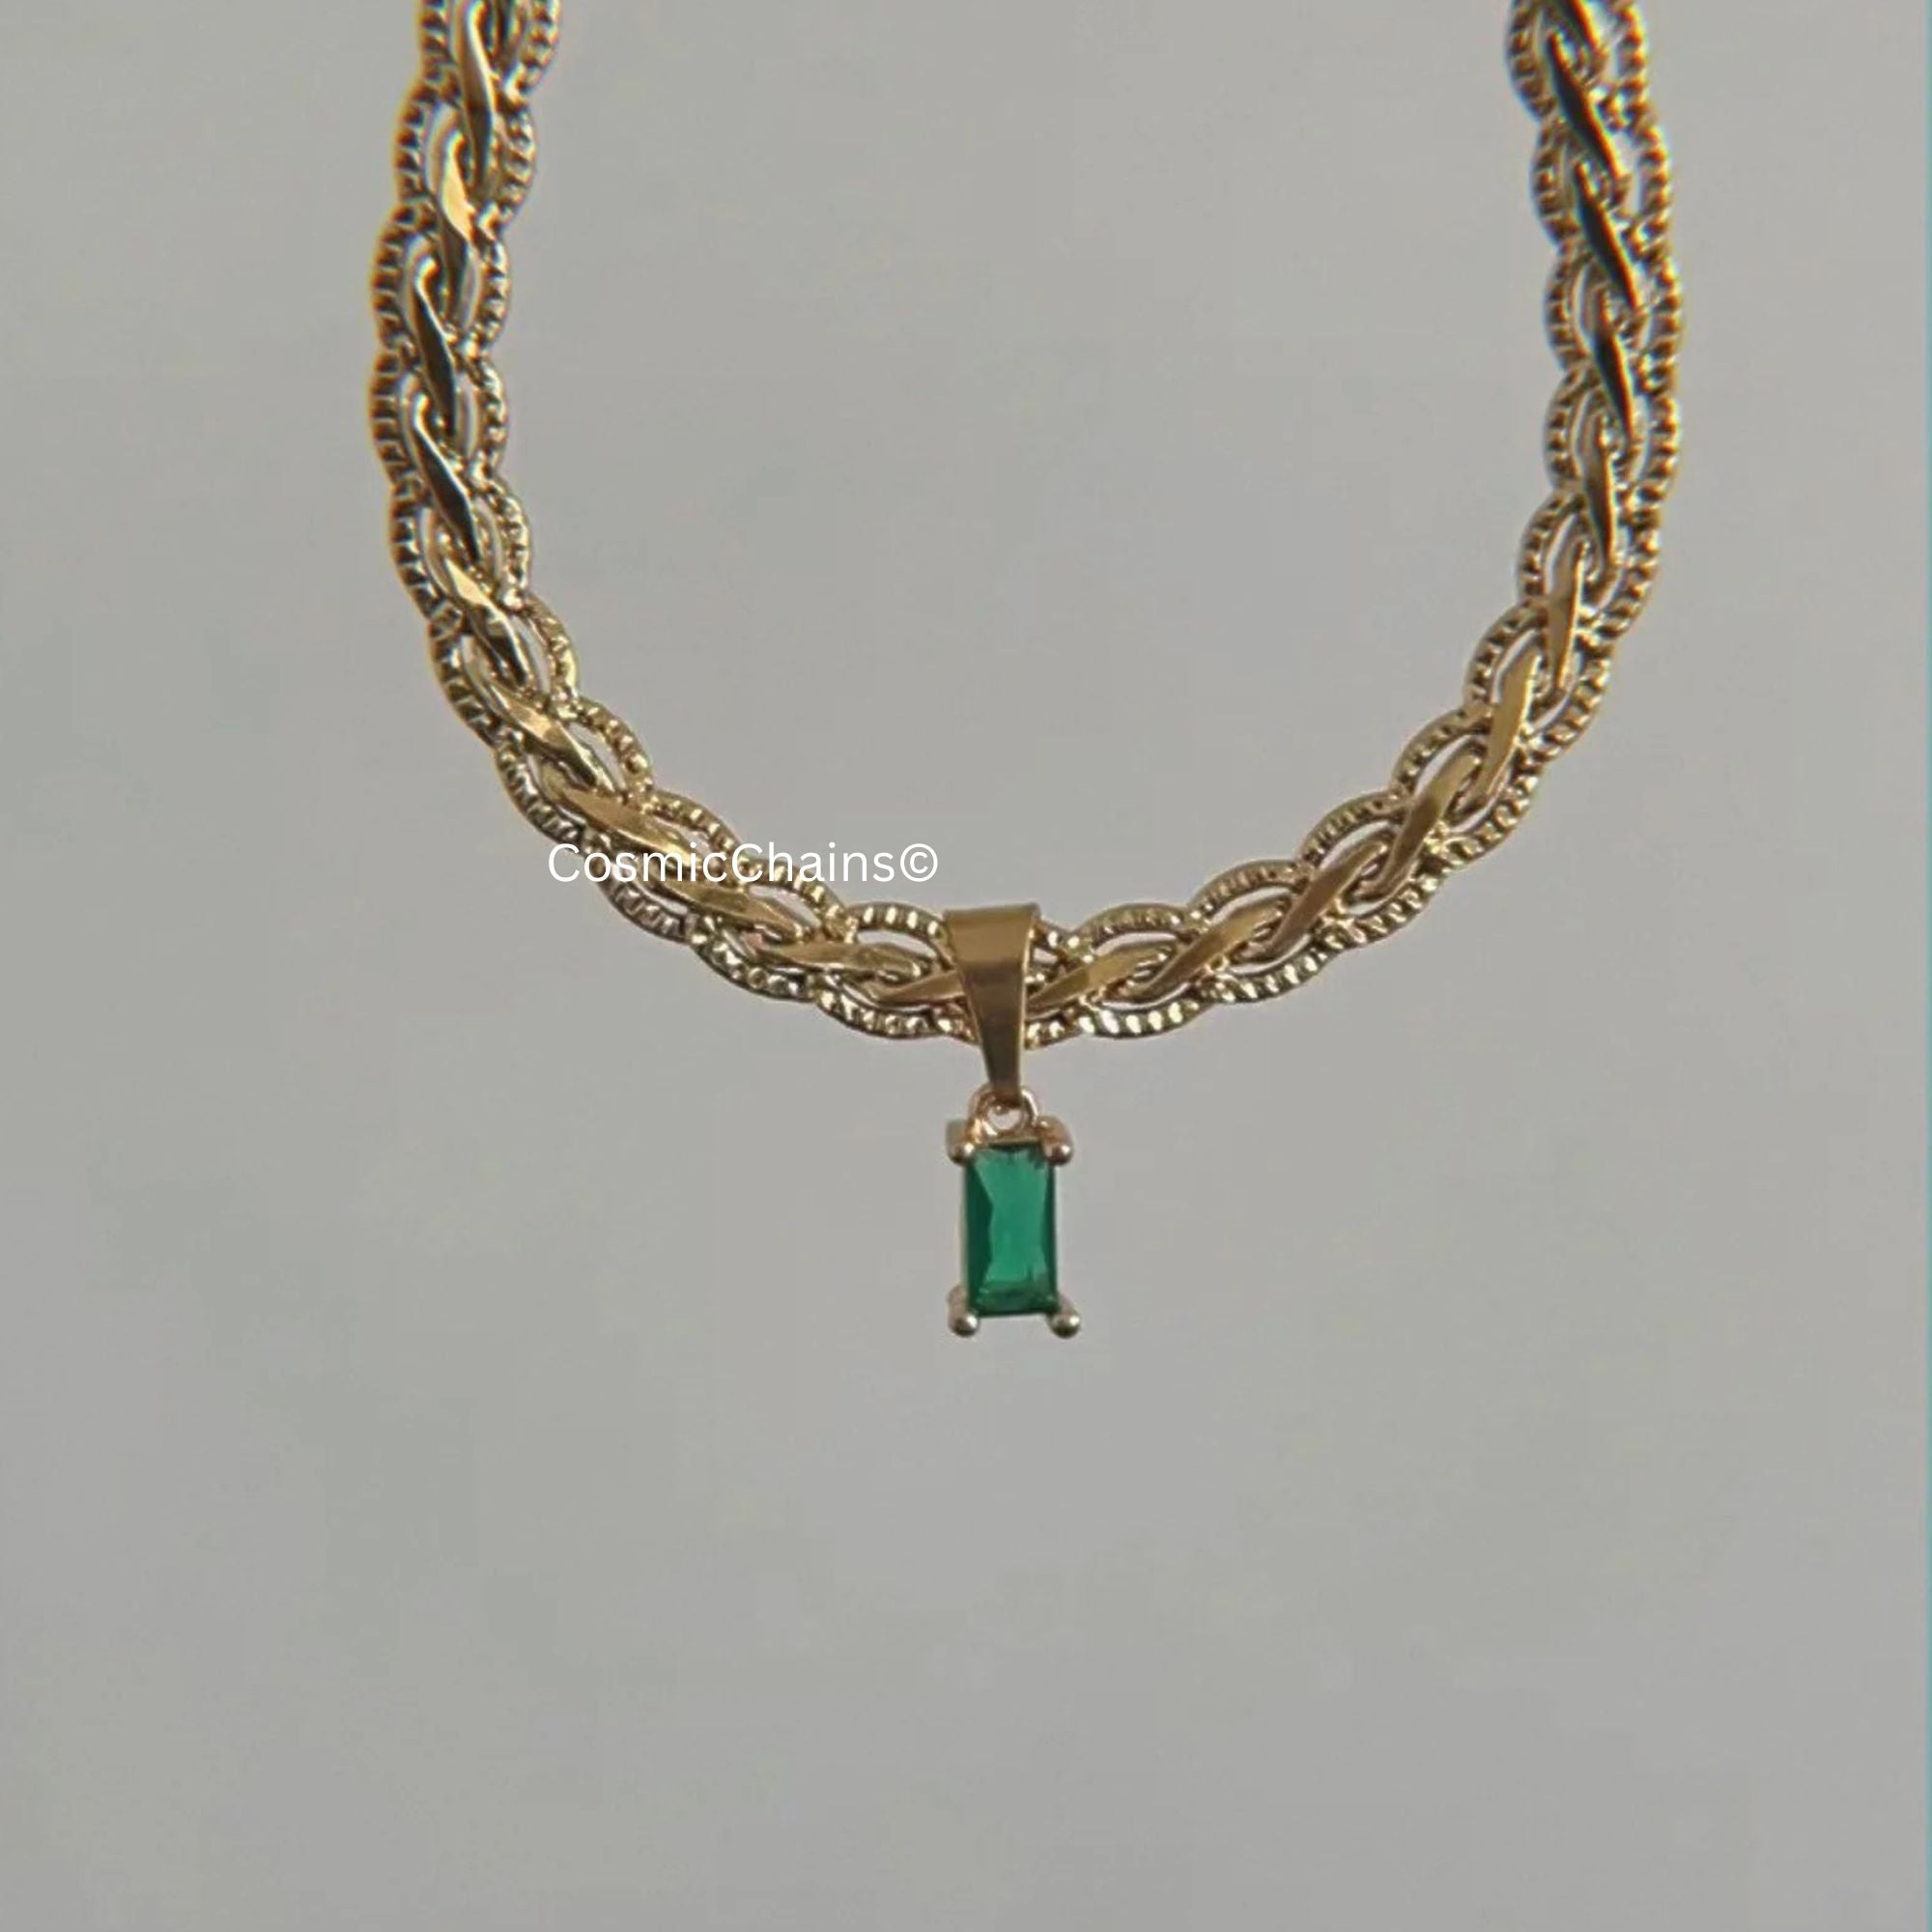 Chic gold necklace showcasing distinctive green rectangle charm 